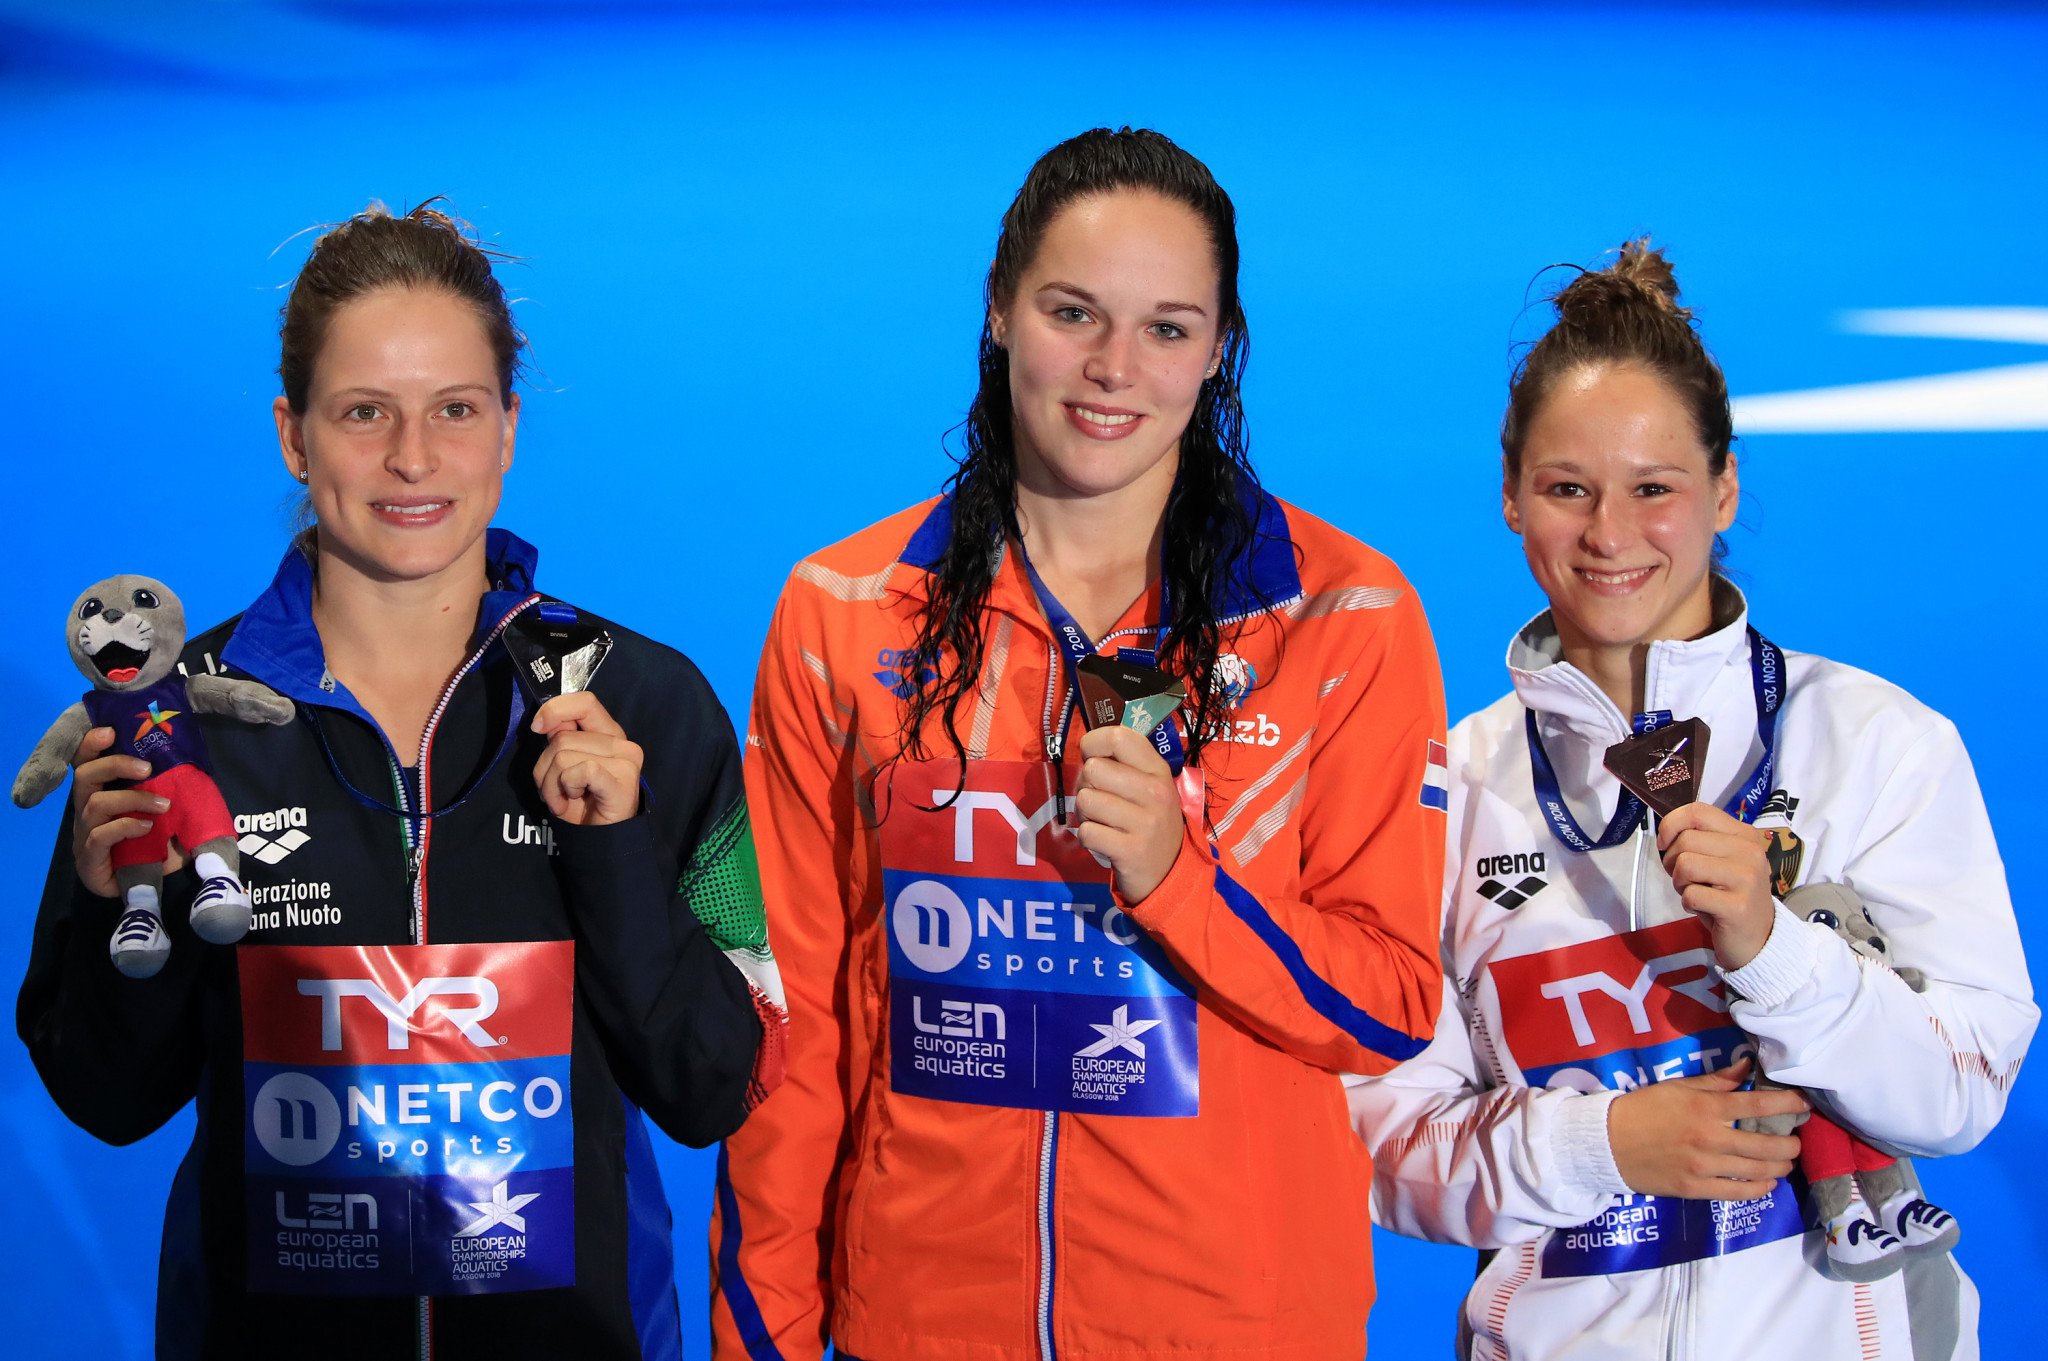 Celine van Duijn from The Netherlands took gold today in the women's 10m platform final, as the defending champion Lois Toulson from Great Britain could only manage fifth ©Getty Images